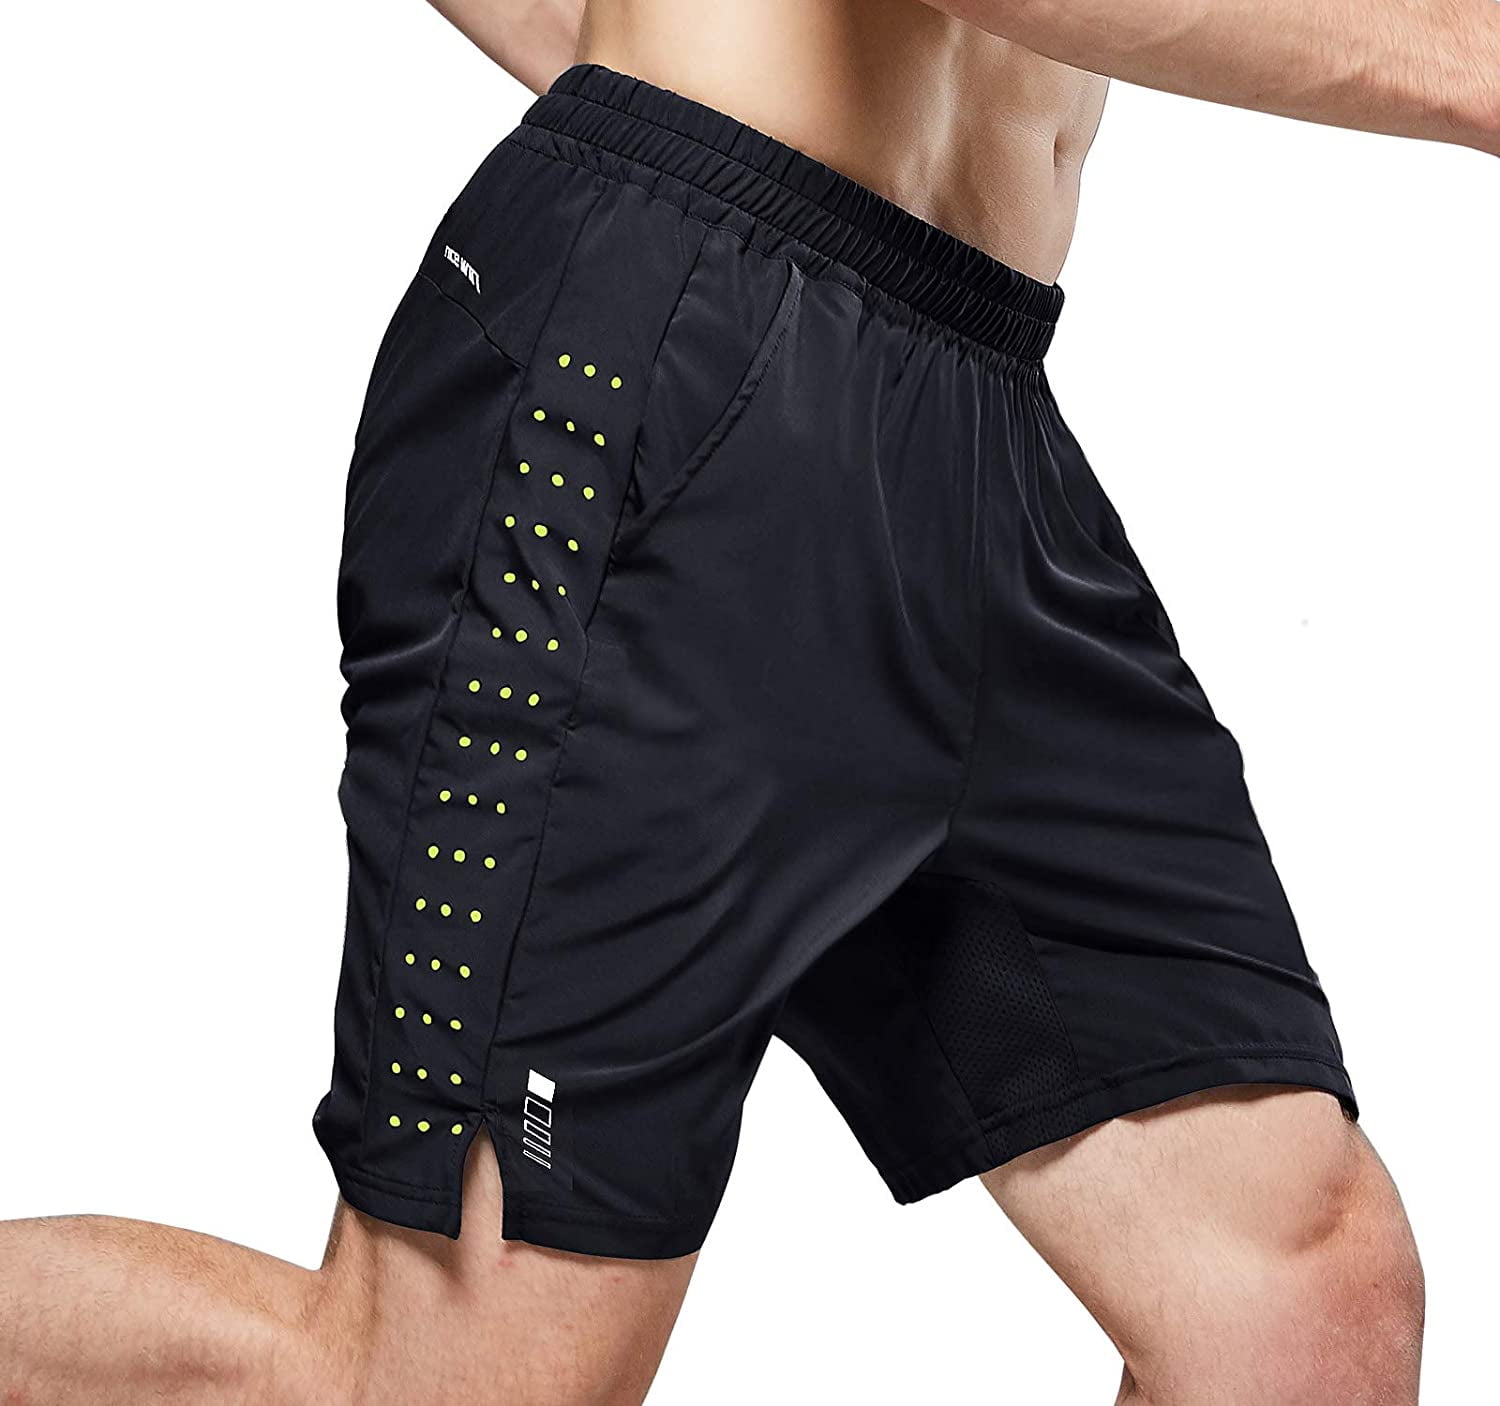 Mens Gym Workout Shorts Quick Dry Lightweight Athletic Training Running Hiking Jogger with Zipper Pockets